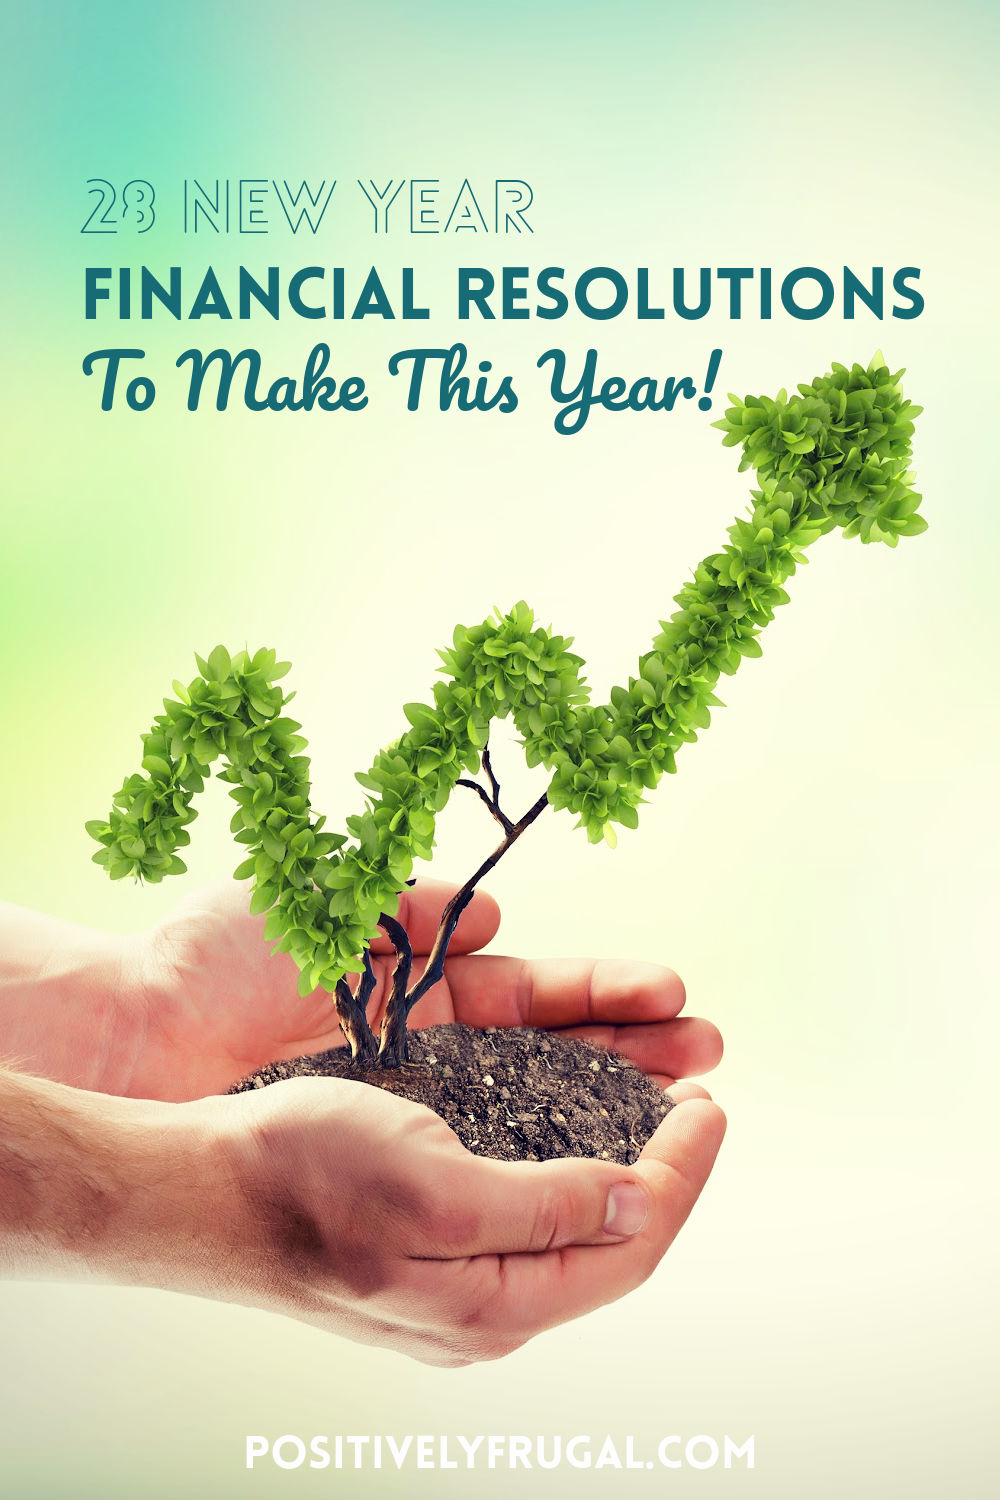 28 New Year Financial Resolutions to make this year by PositivelyFrugal.com